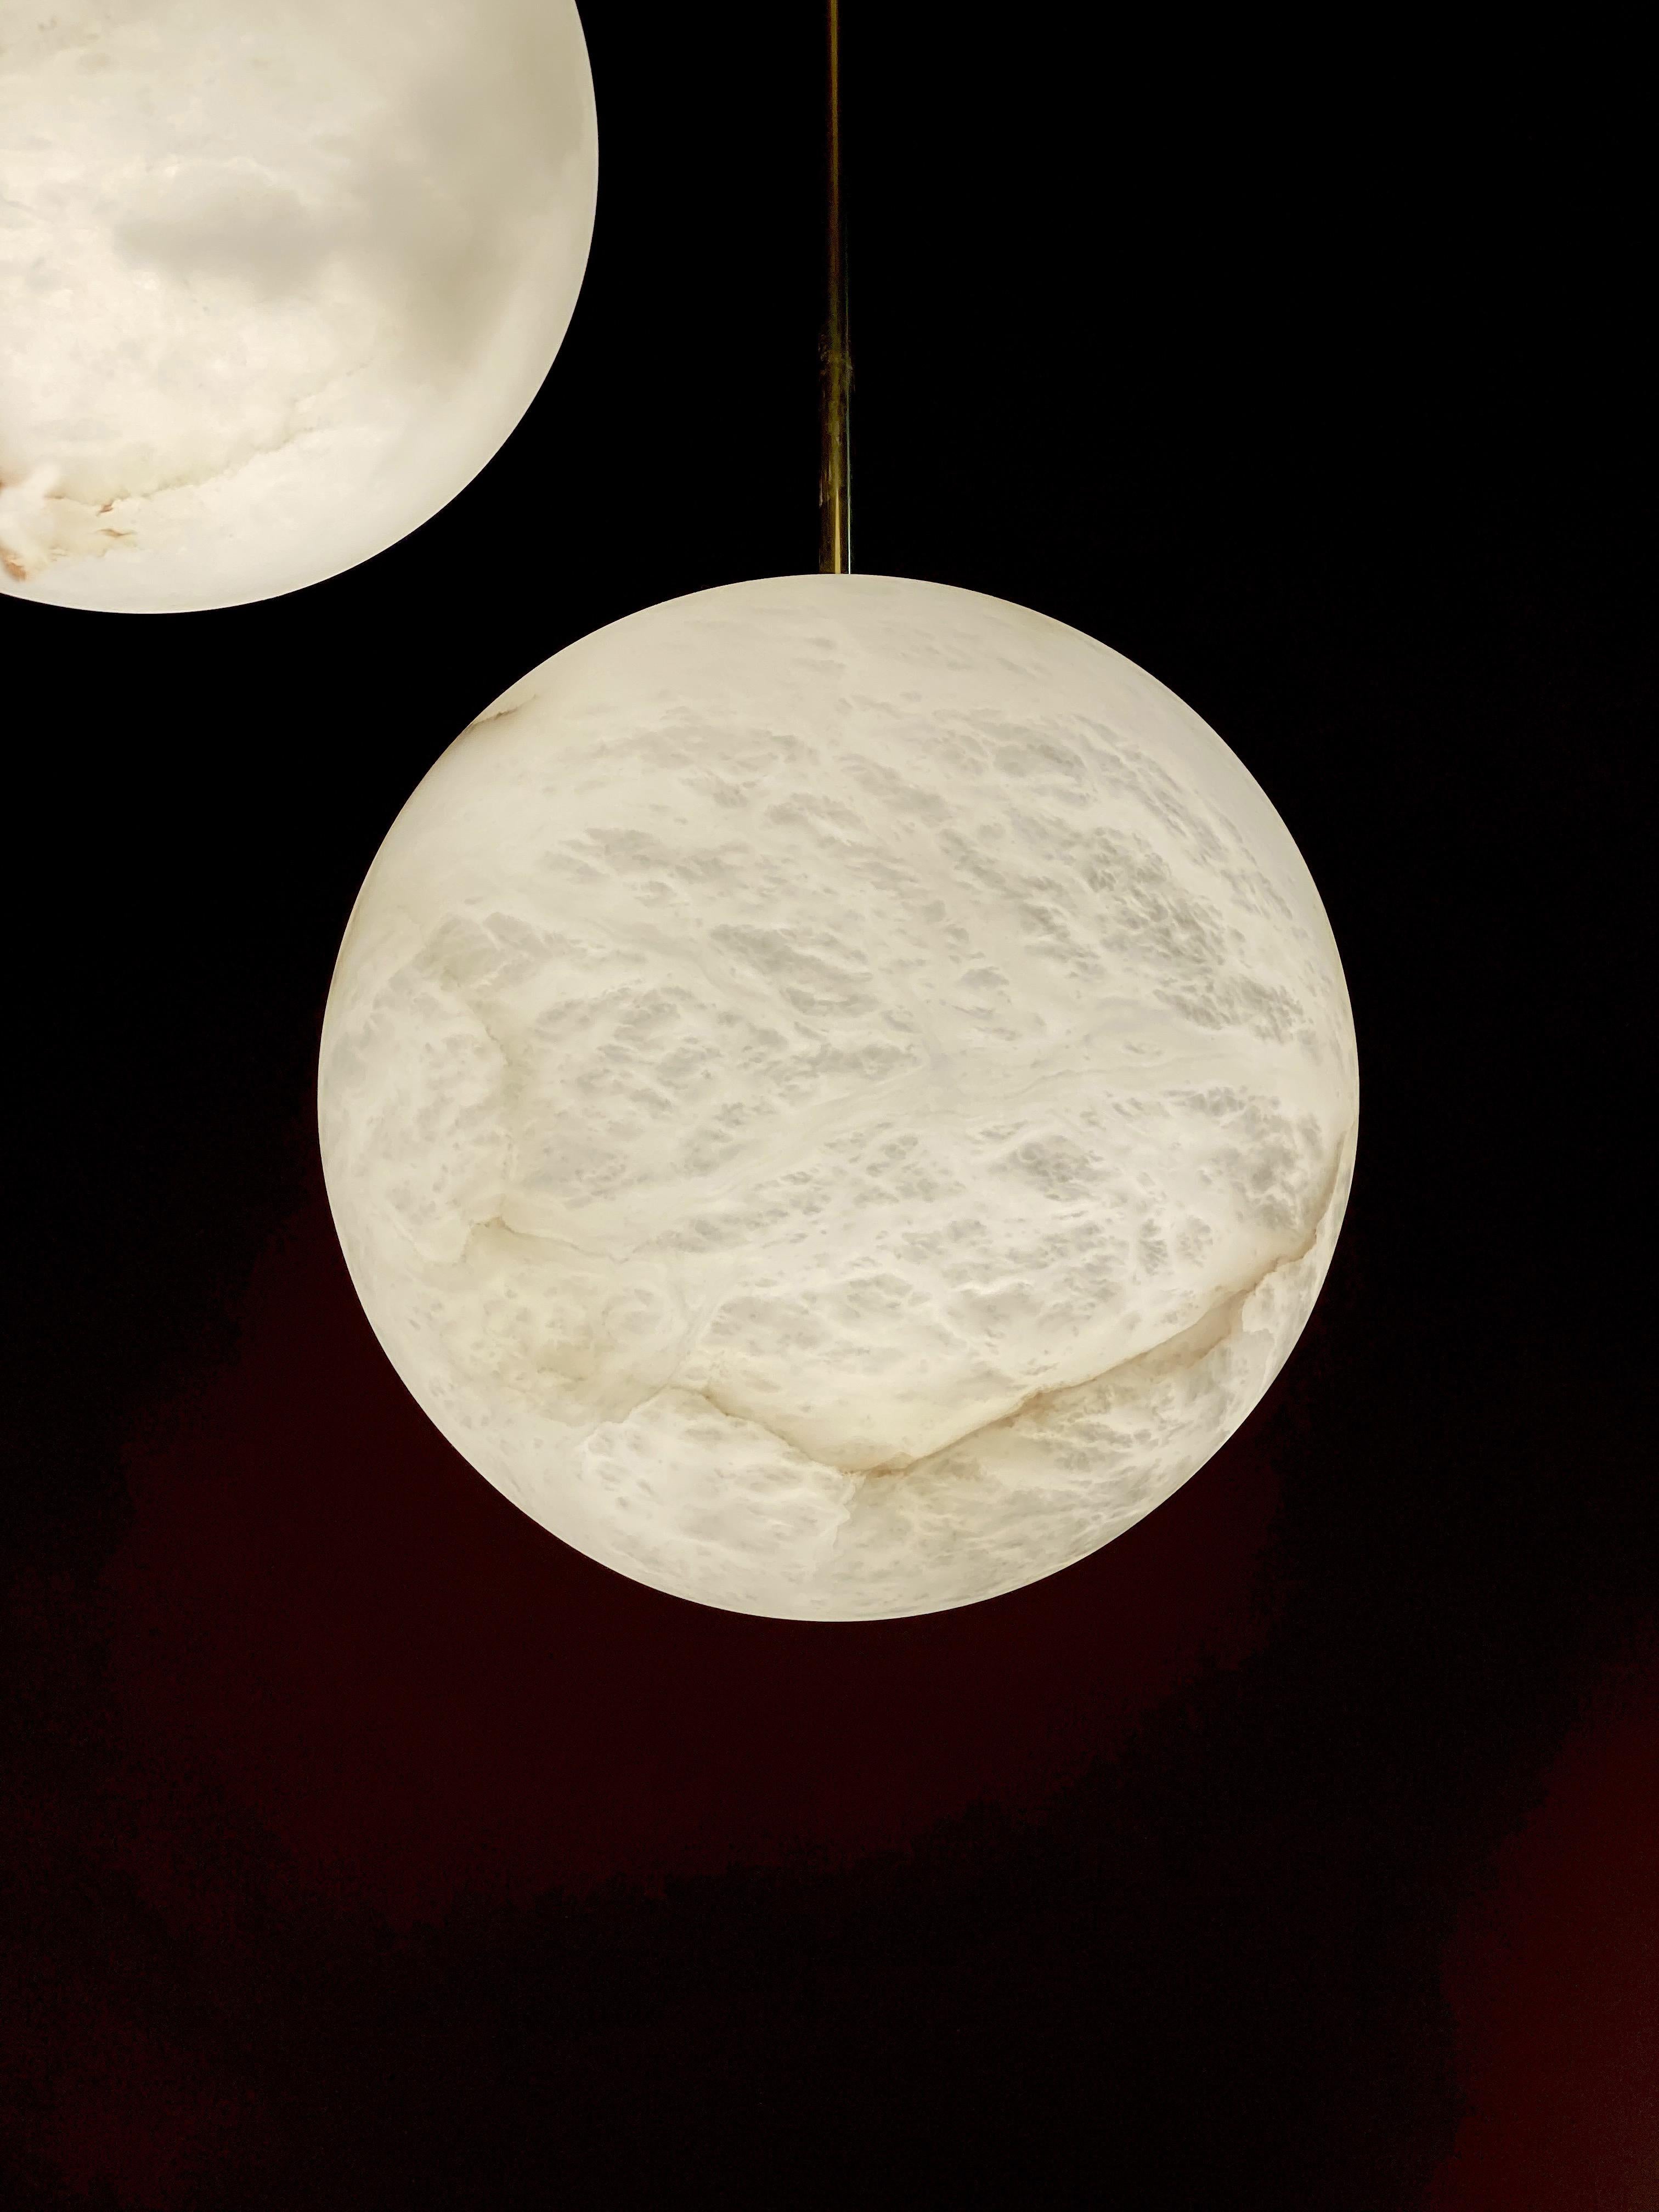 Galaxy contemporary Italian alabaster marble globe chandelier with two additional spheres.
Hight cm 150 - 59 inches 
Exclusive production of Tuscany alabaster, handmade with great skill of Italian craftsmanship.